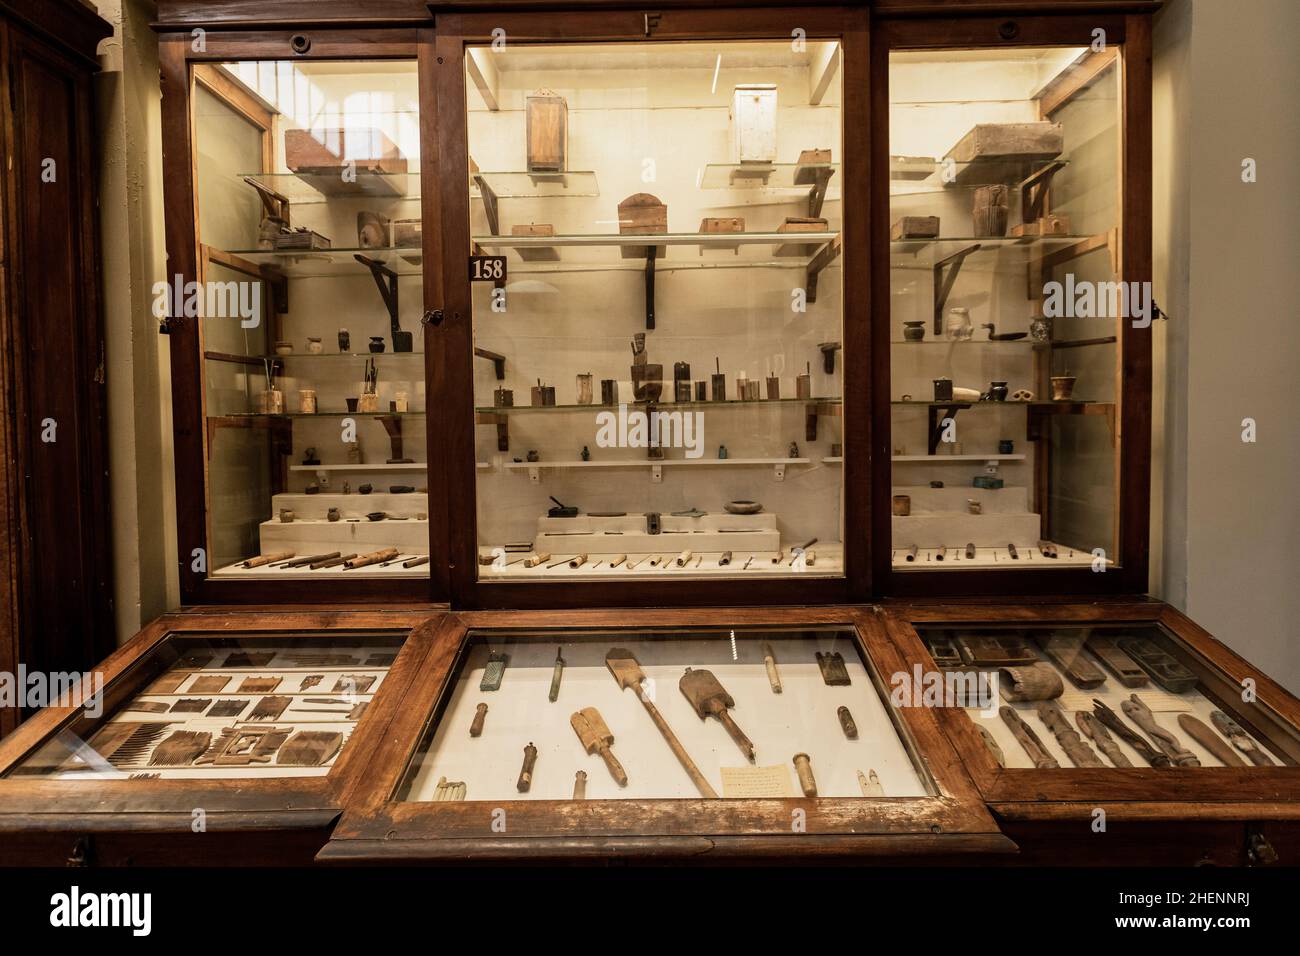 CAIRO, EGYPT- NOVEMBER 13, 2018: Exhibits of Ancient tools at the Museum of Egyptian Antiquities in Cairo Stock Photo